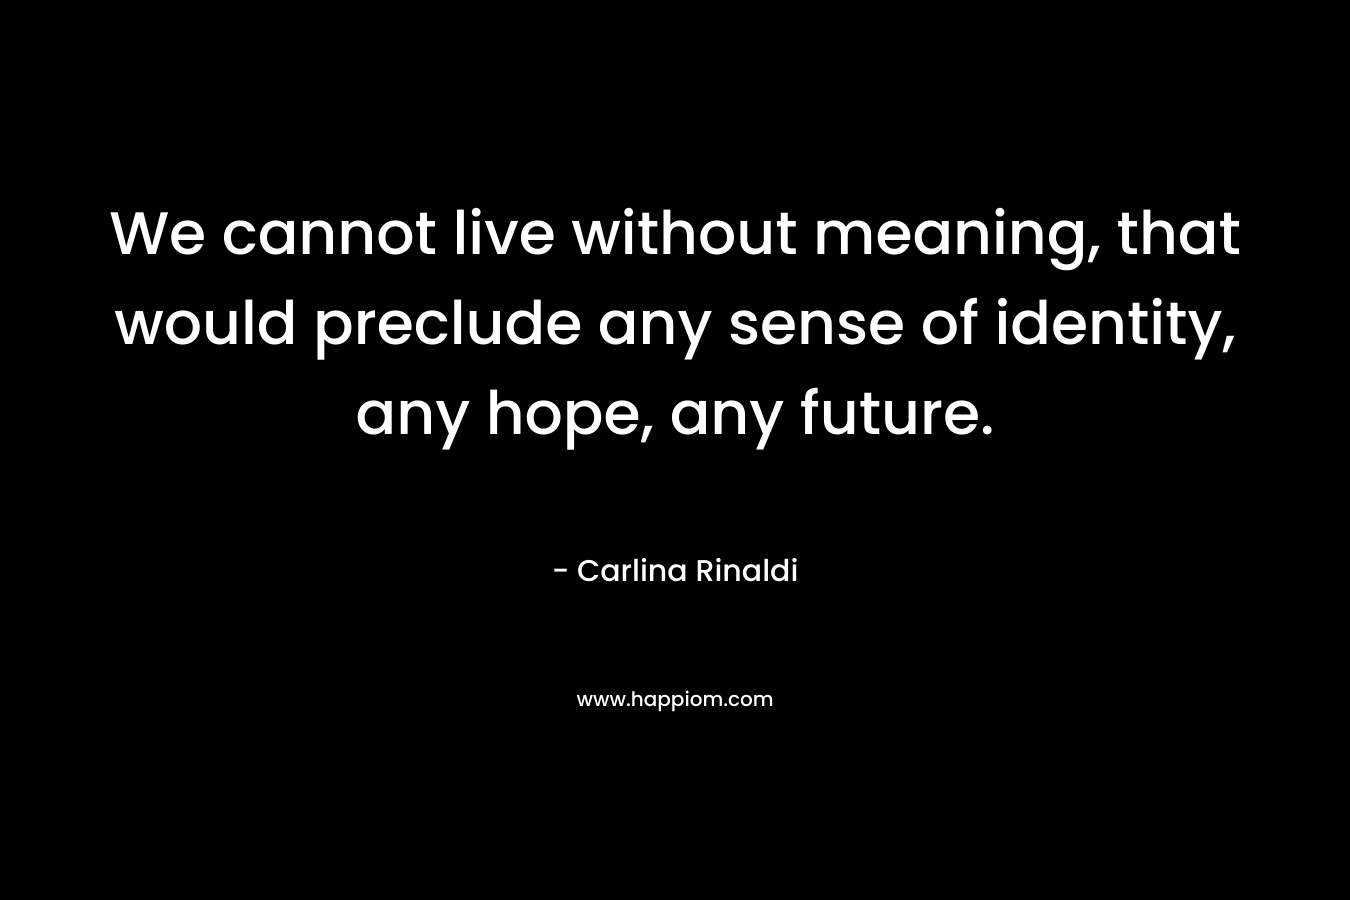 We cannot live without meaning, that would preclude any sense of identity, any hope, any future. – Carlina Rinaldi